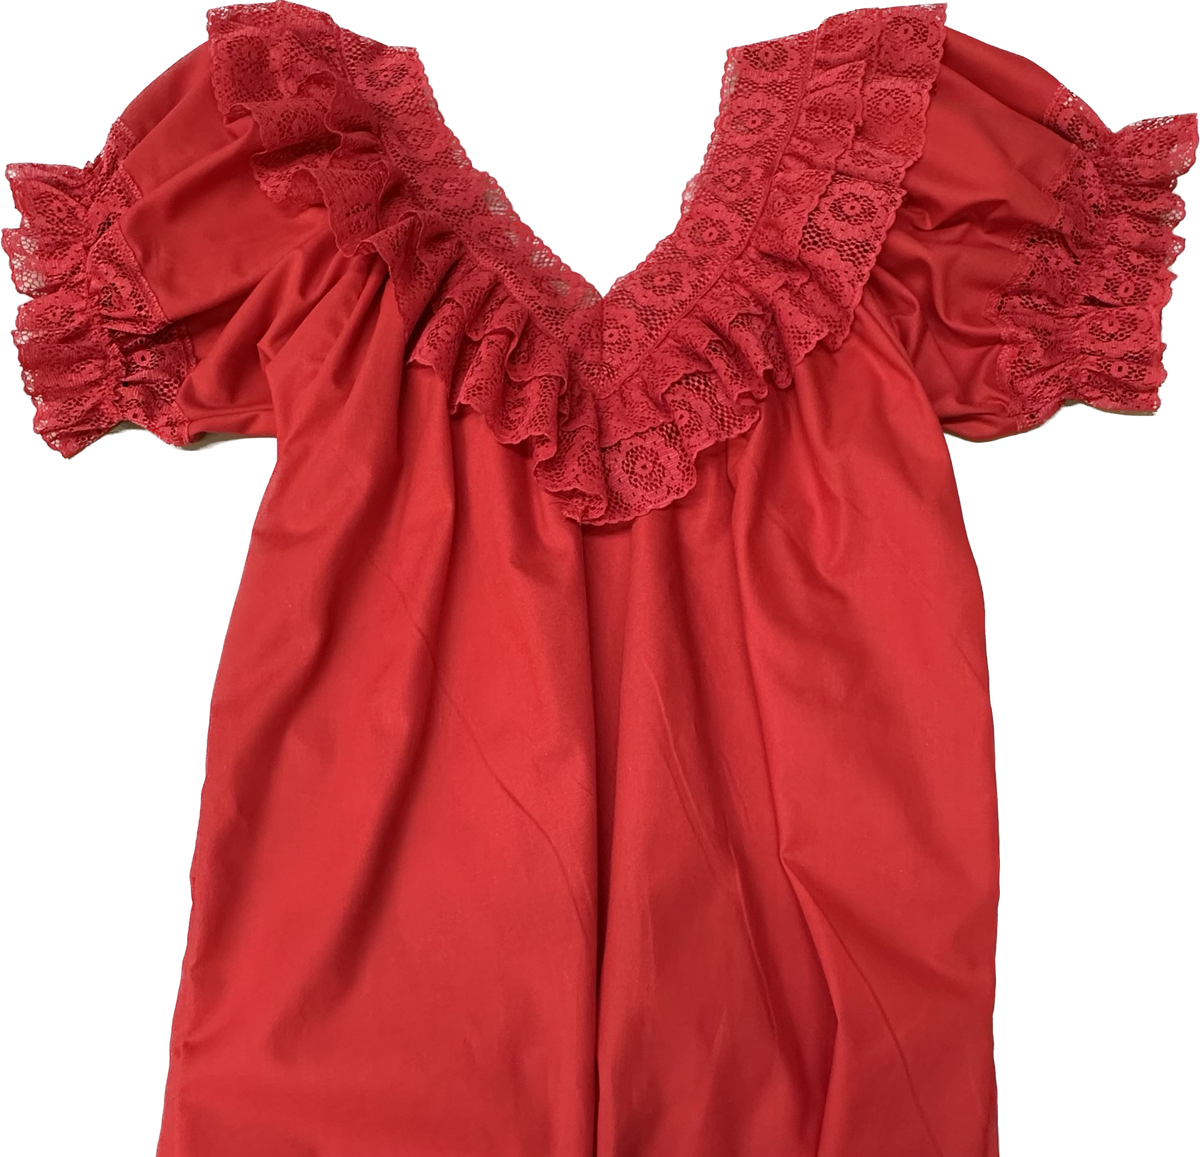 An Fiesta V-Neck Blouse from Square Up Fashions with ruffles on it.